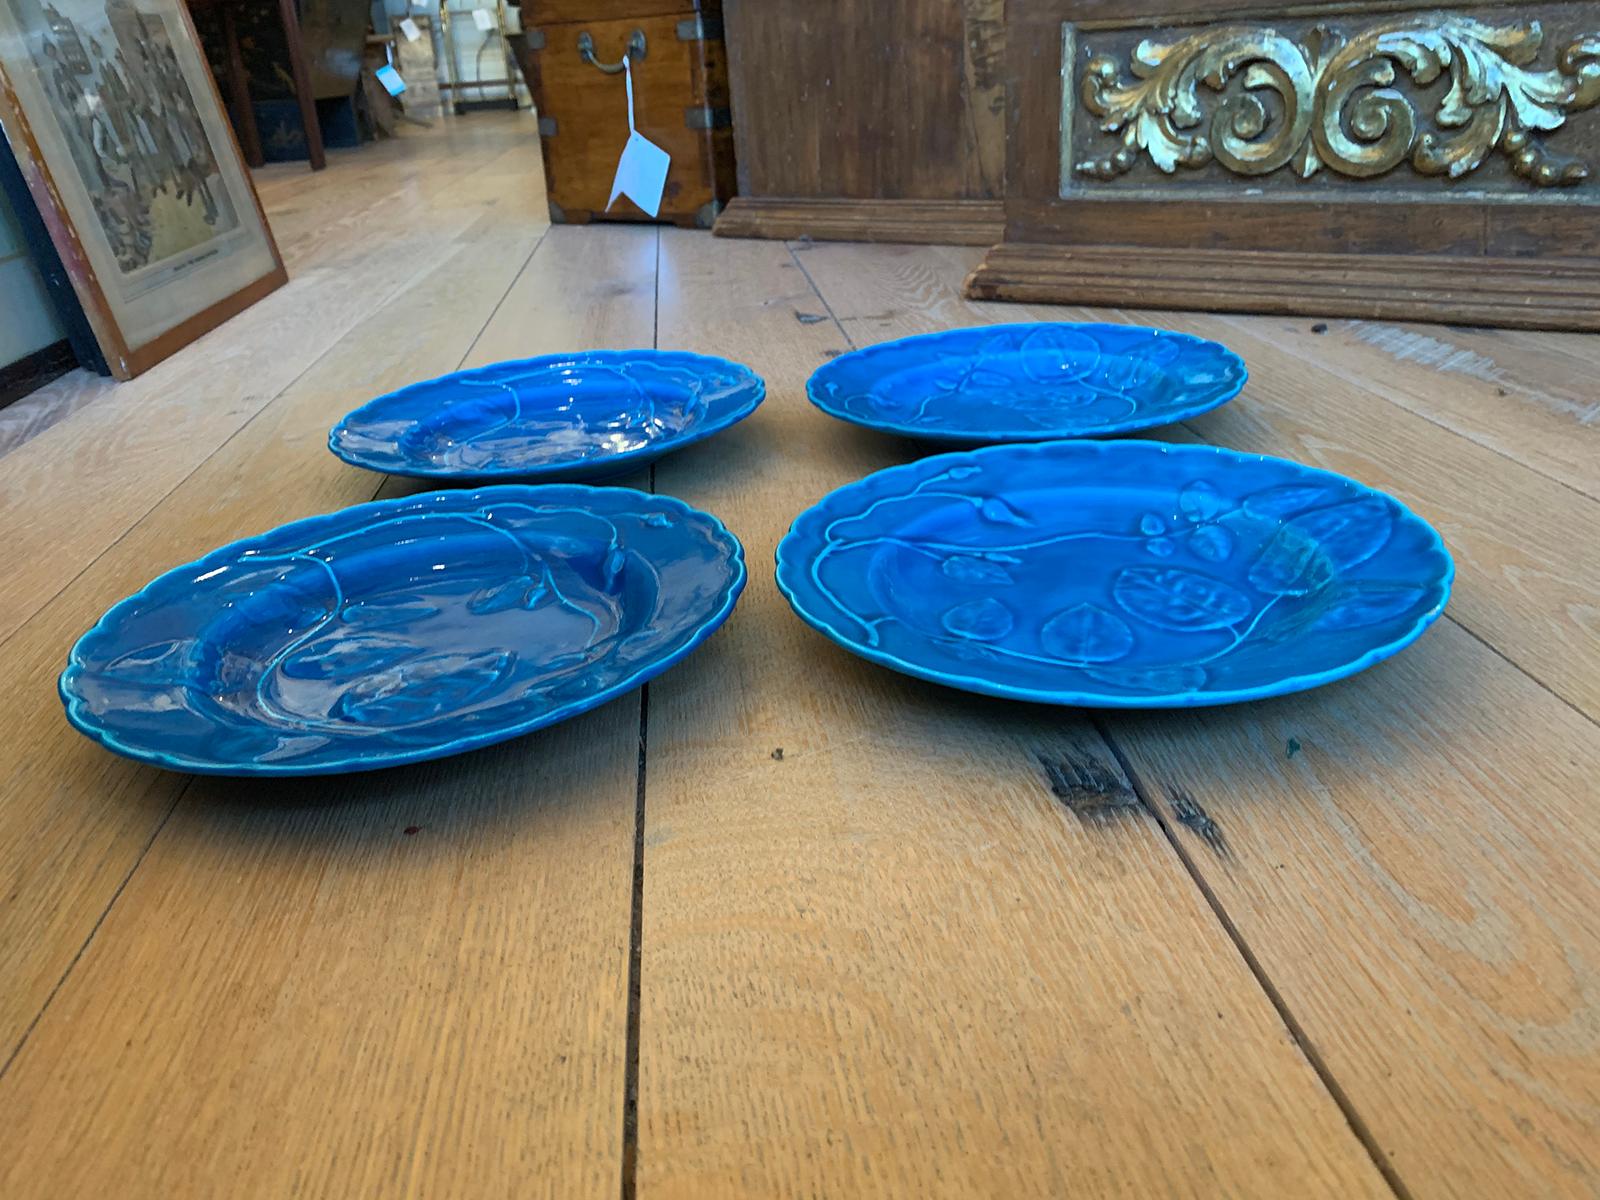 19th Century Set of Four circa 1875 Blue Minton Plates after Royal Worcester's 